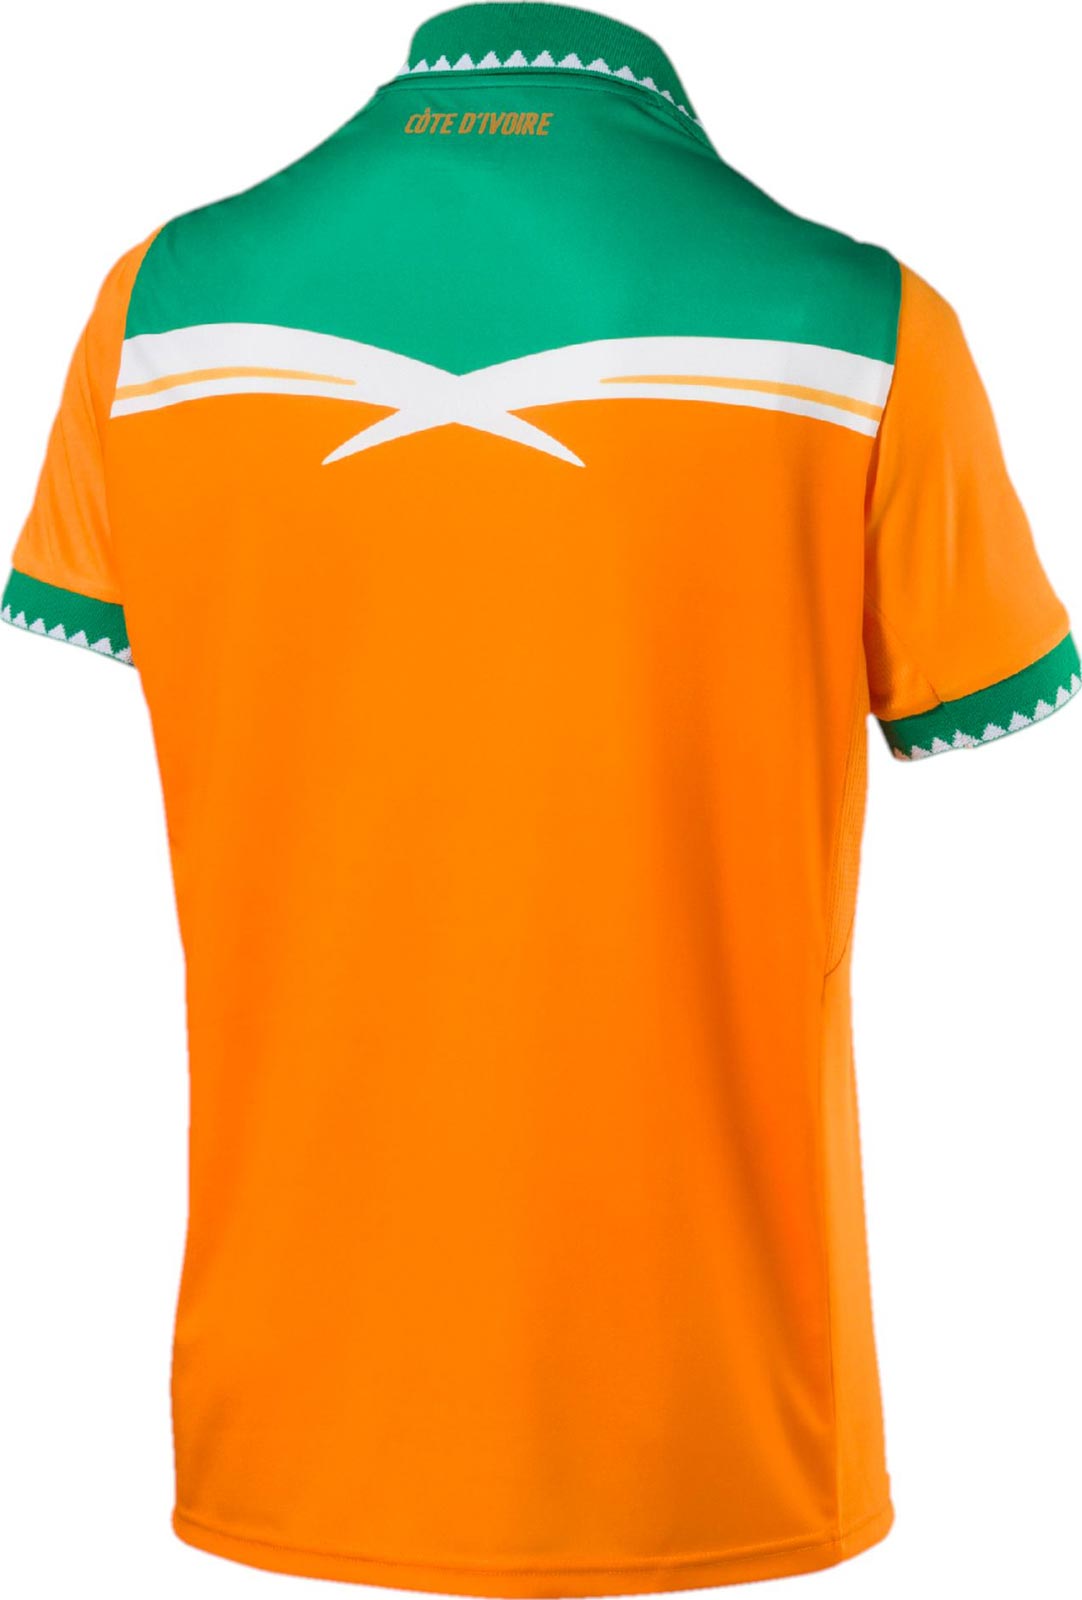 cote-divoire-2017-africa-cup-kit-back